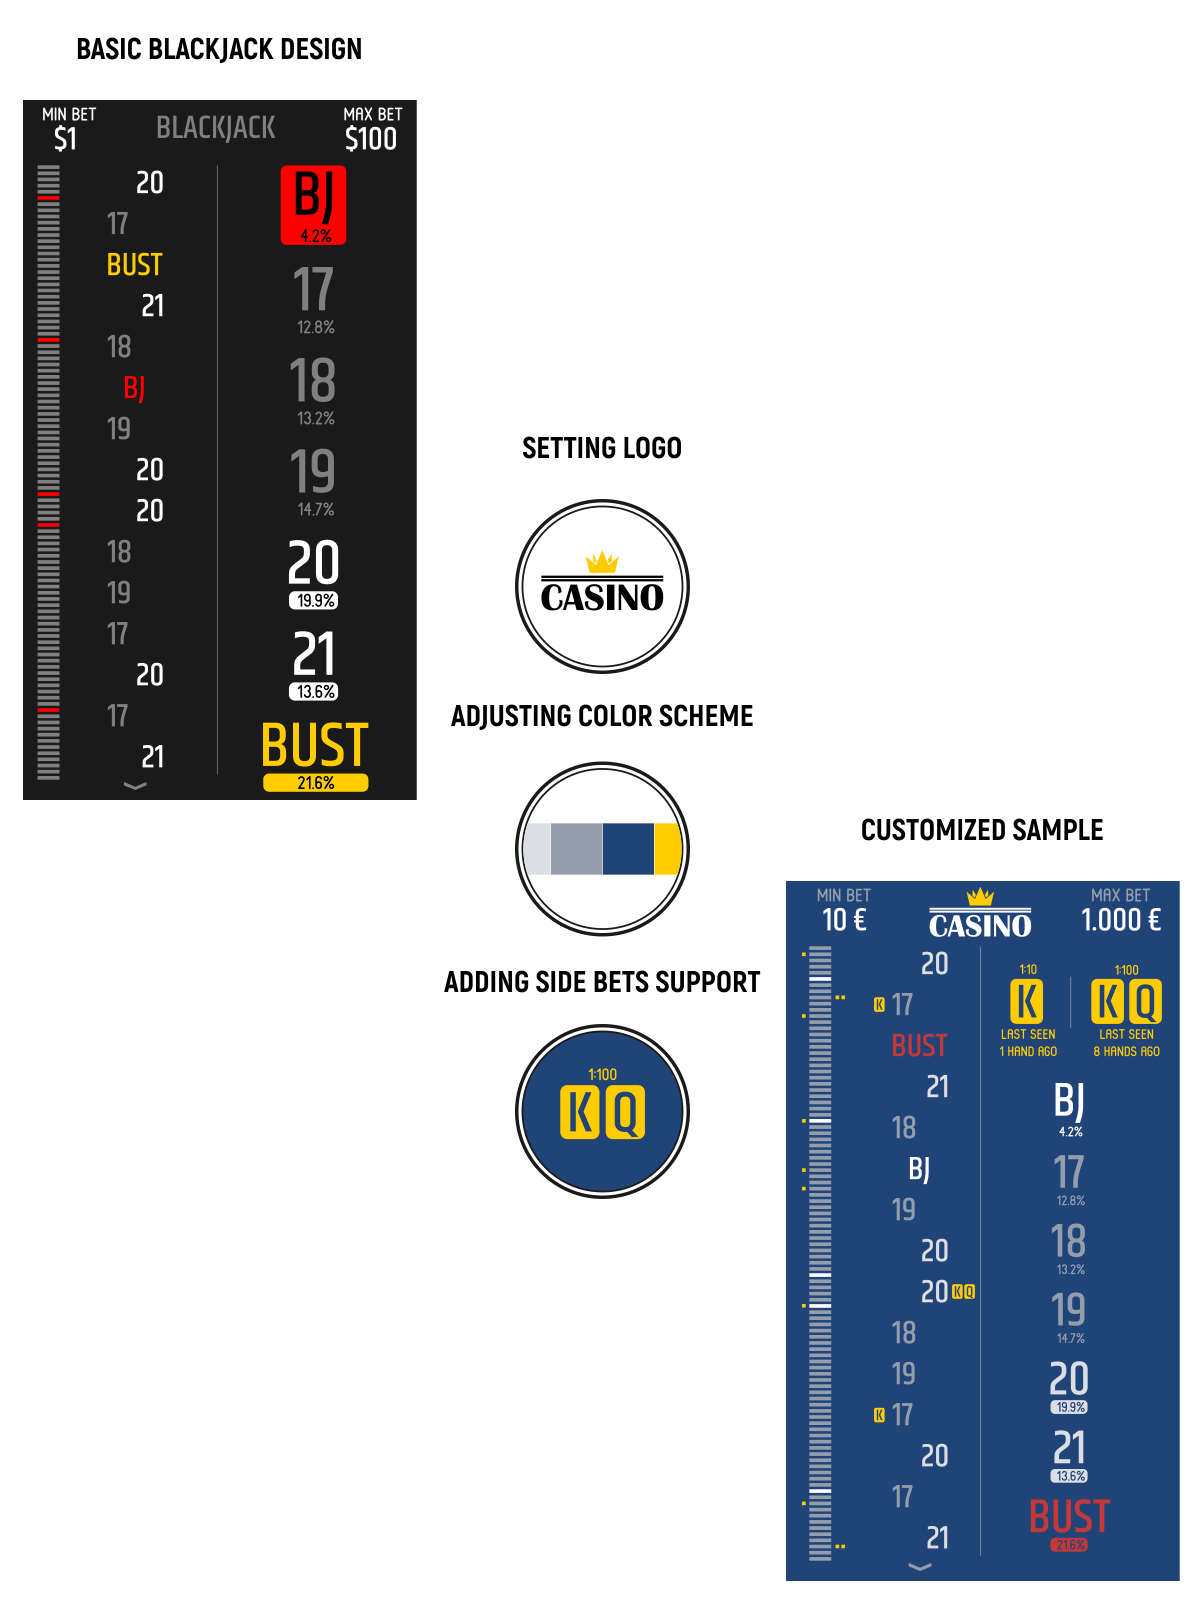 Custom Design and Side Bets Support